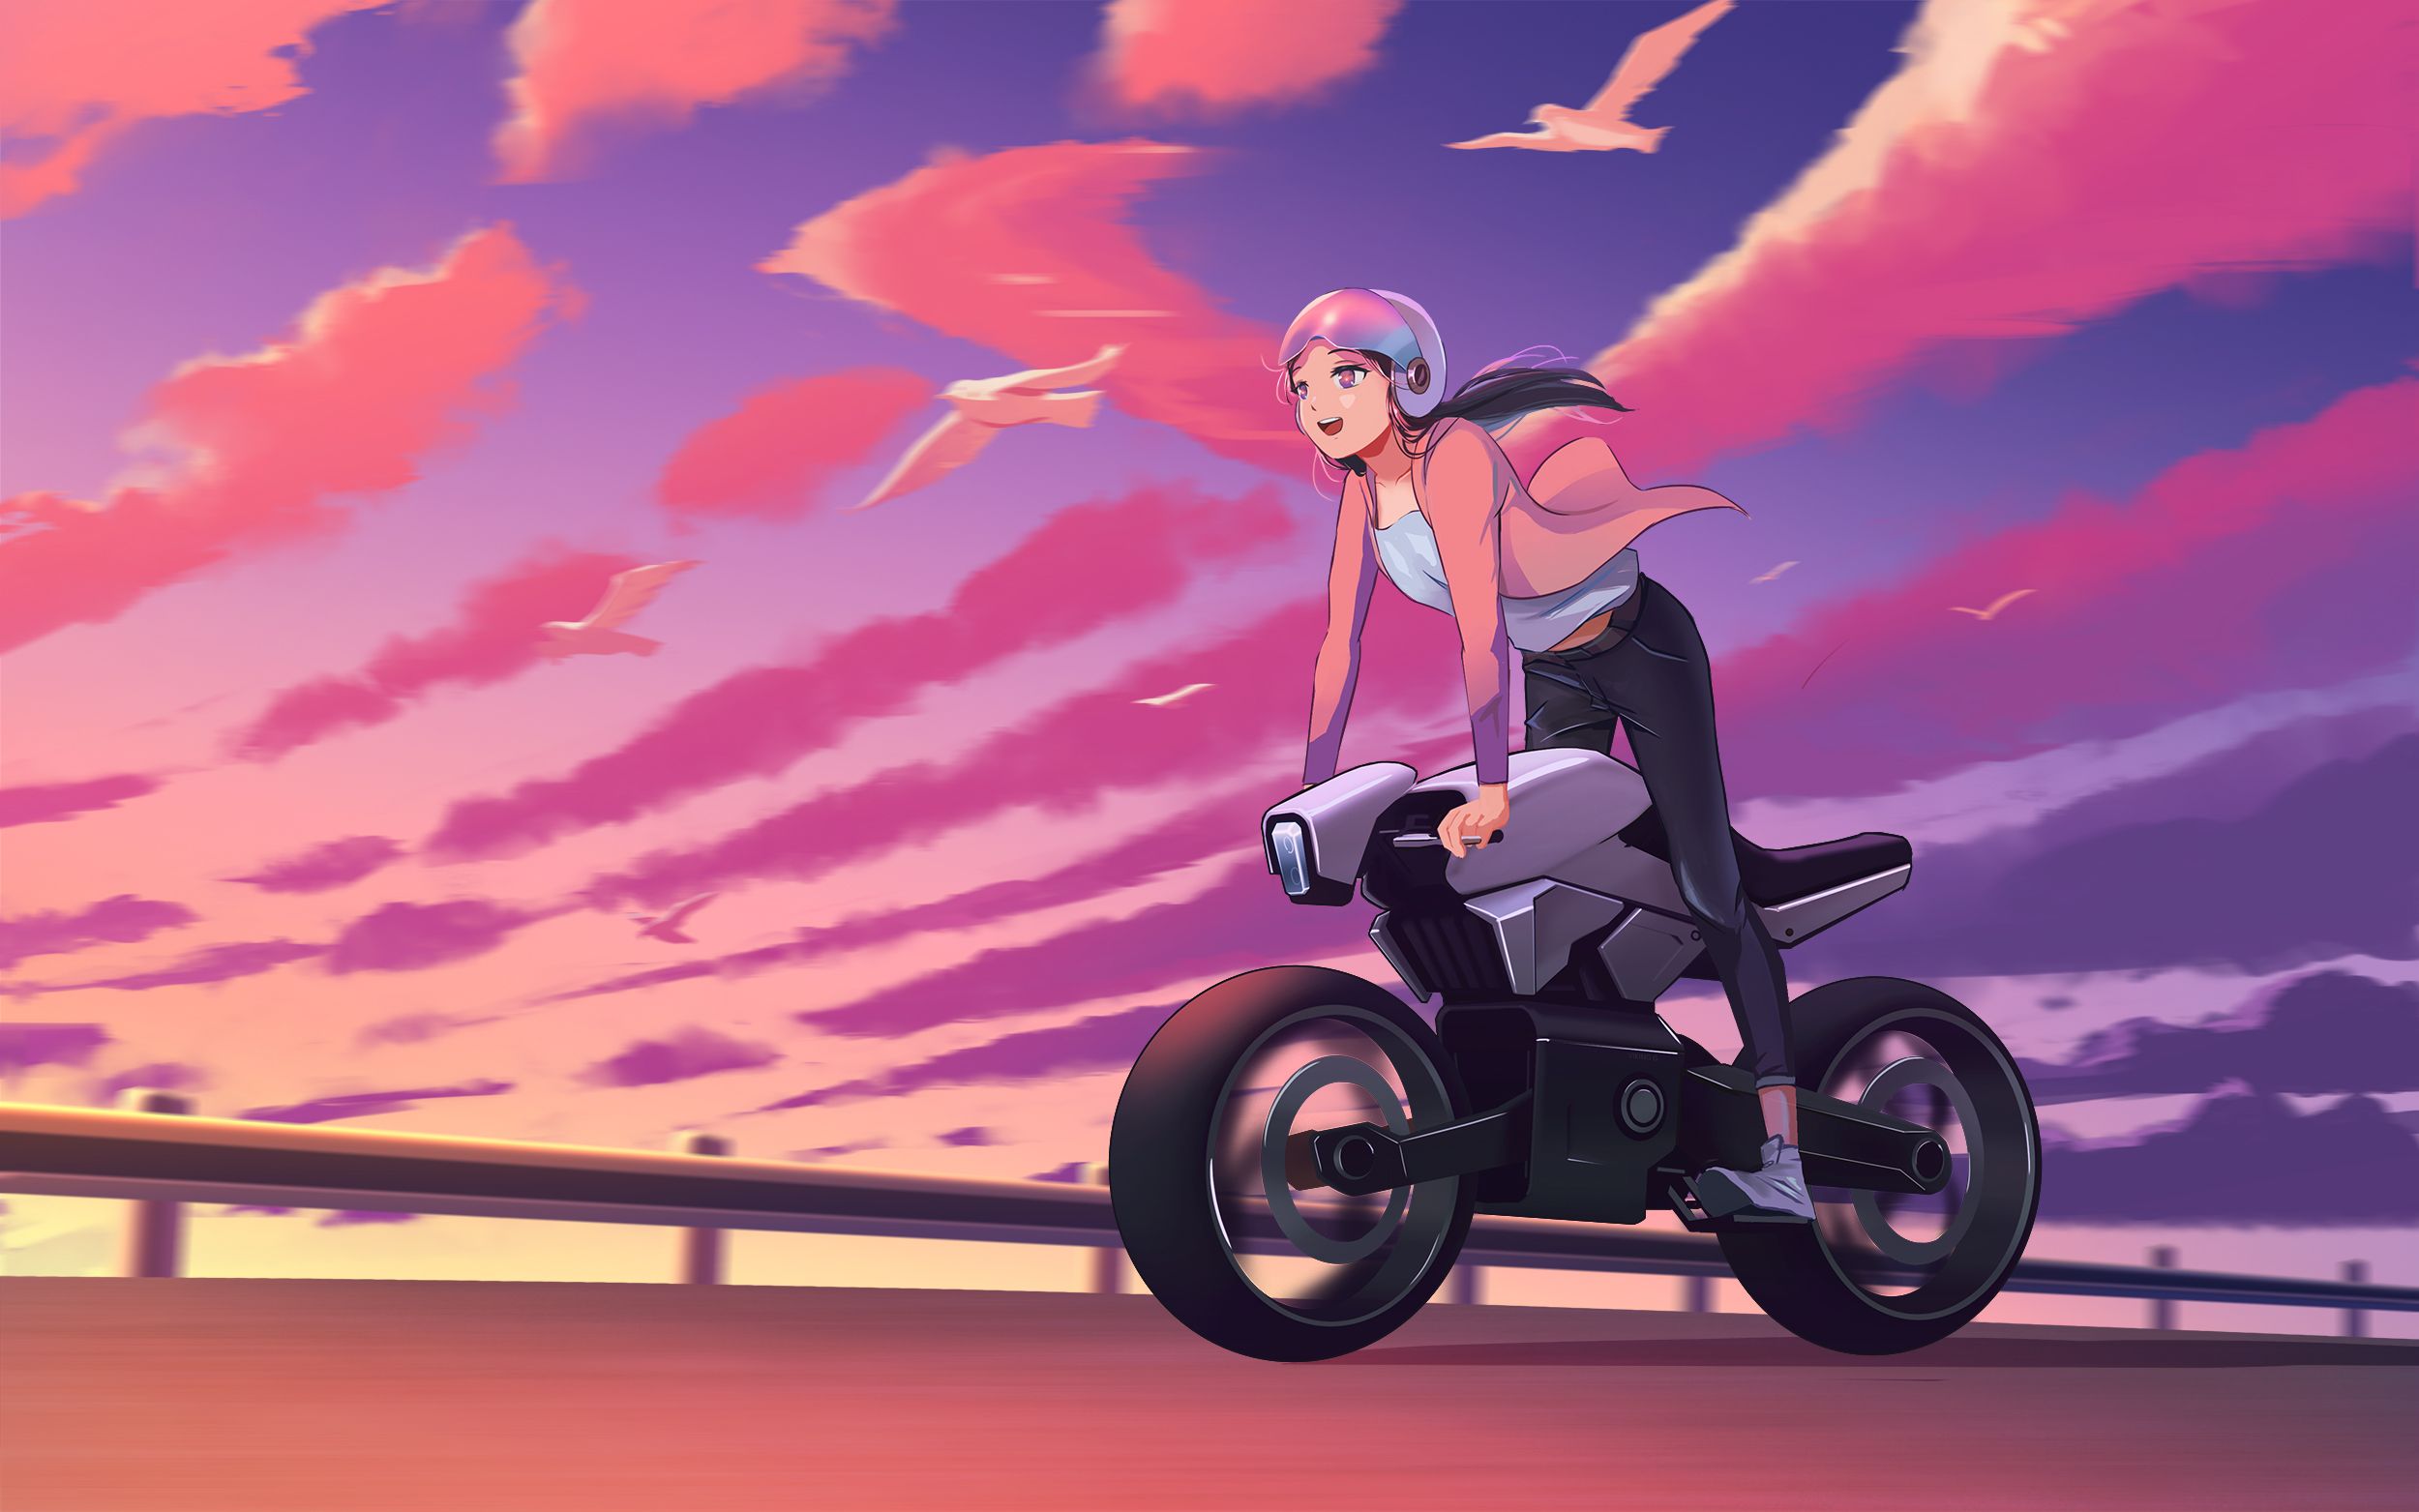 Anime Biker Girl Art, HD Anime, 4k Wallpaper, Image, Background, Photo and Picture